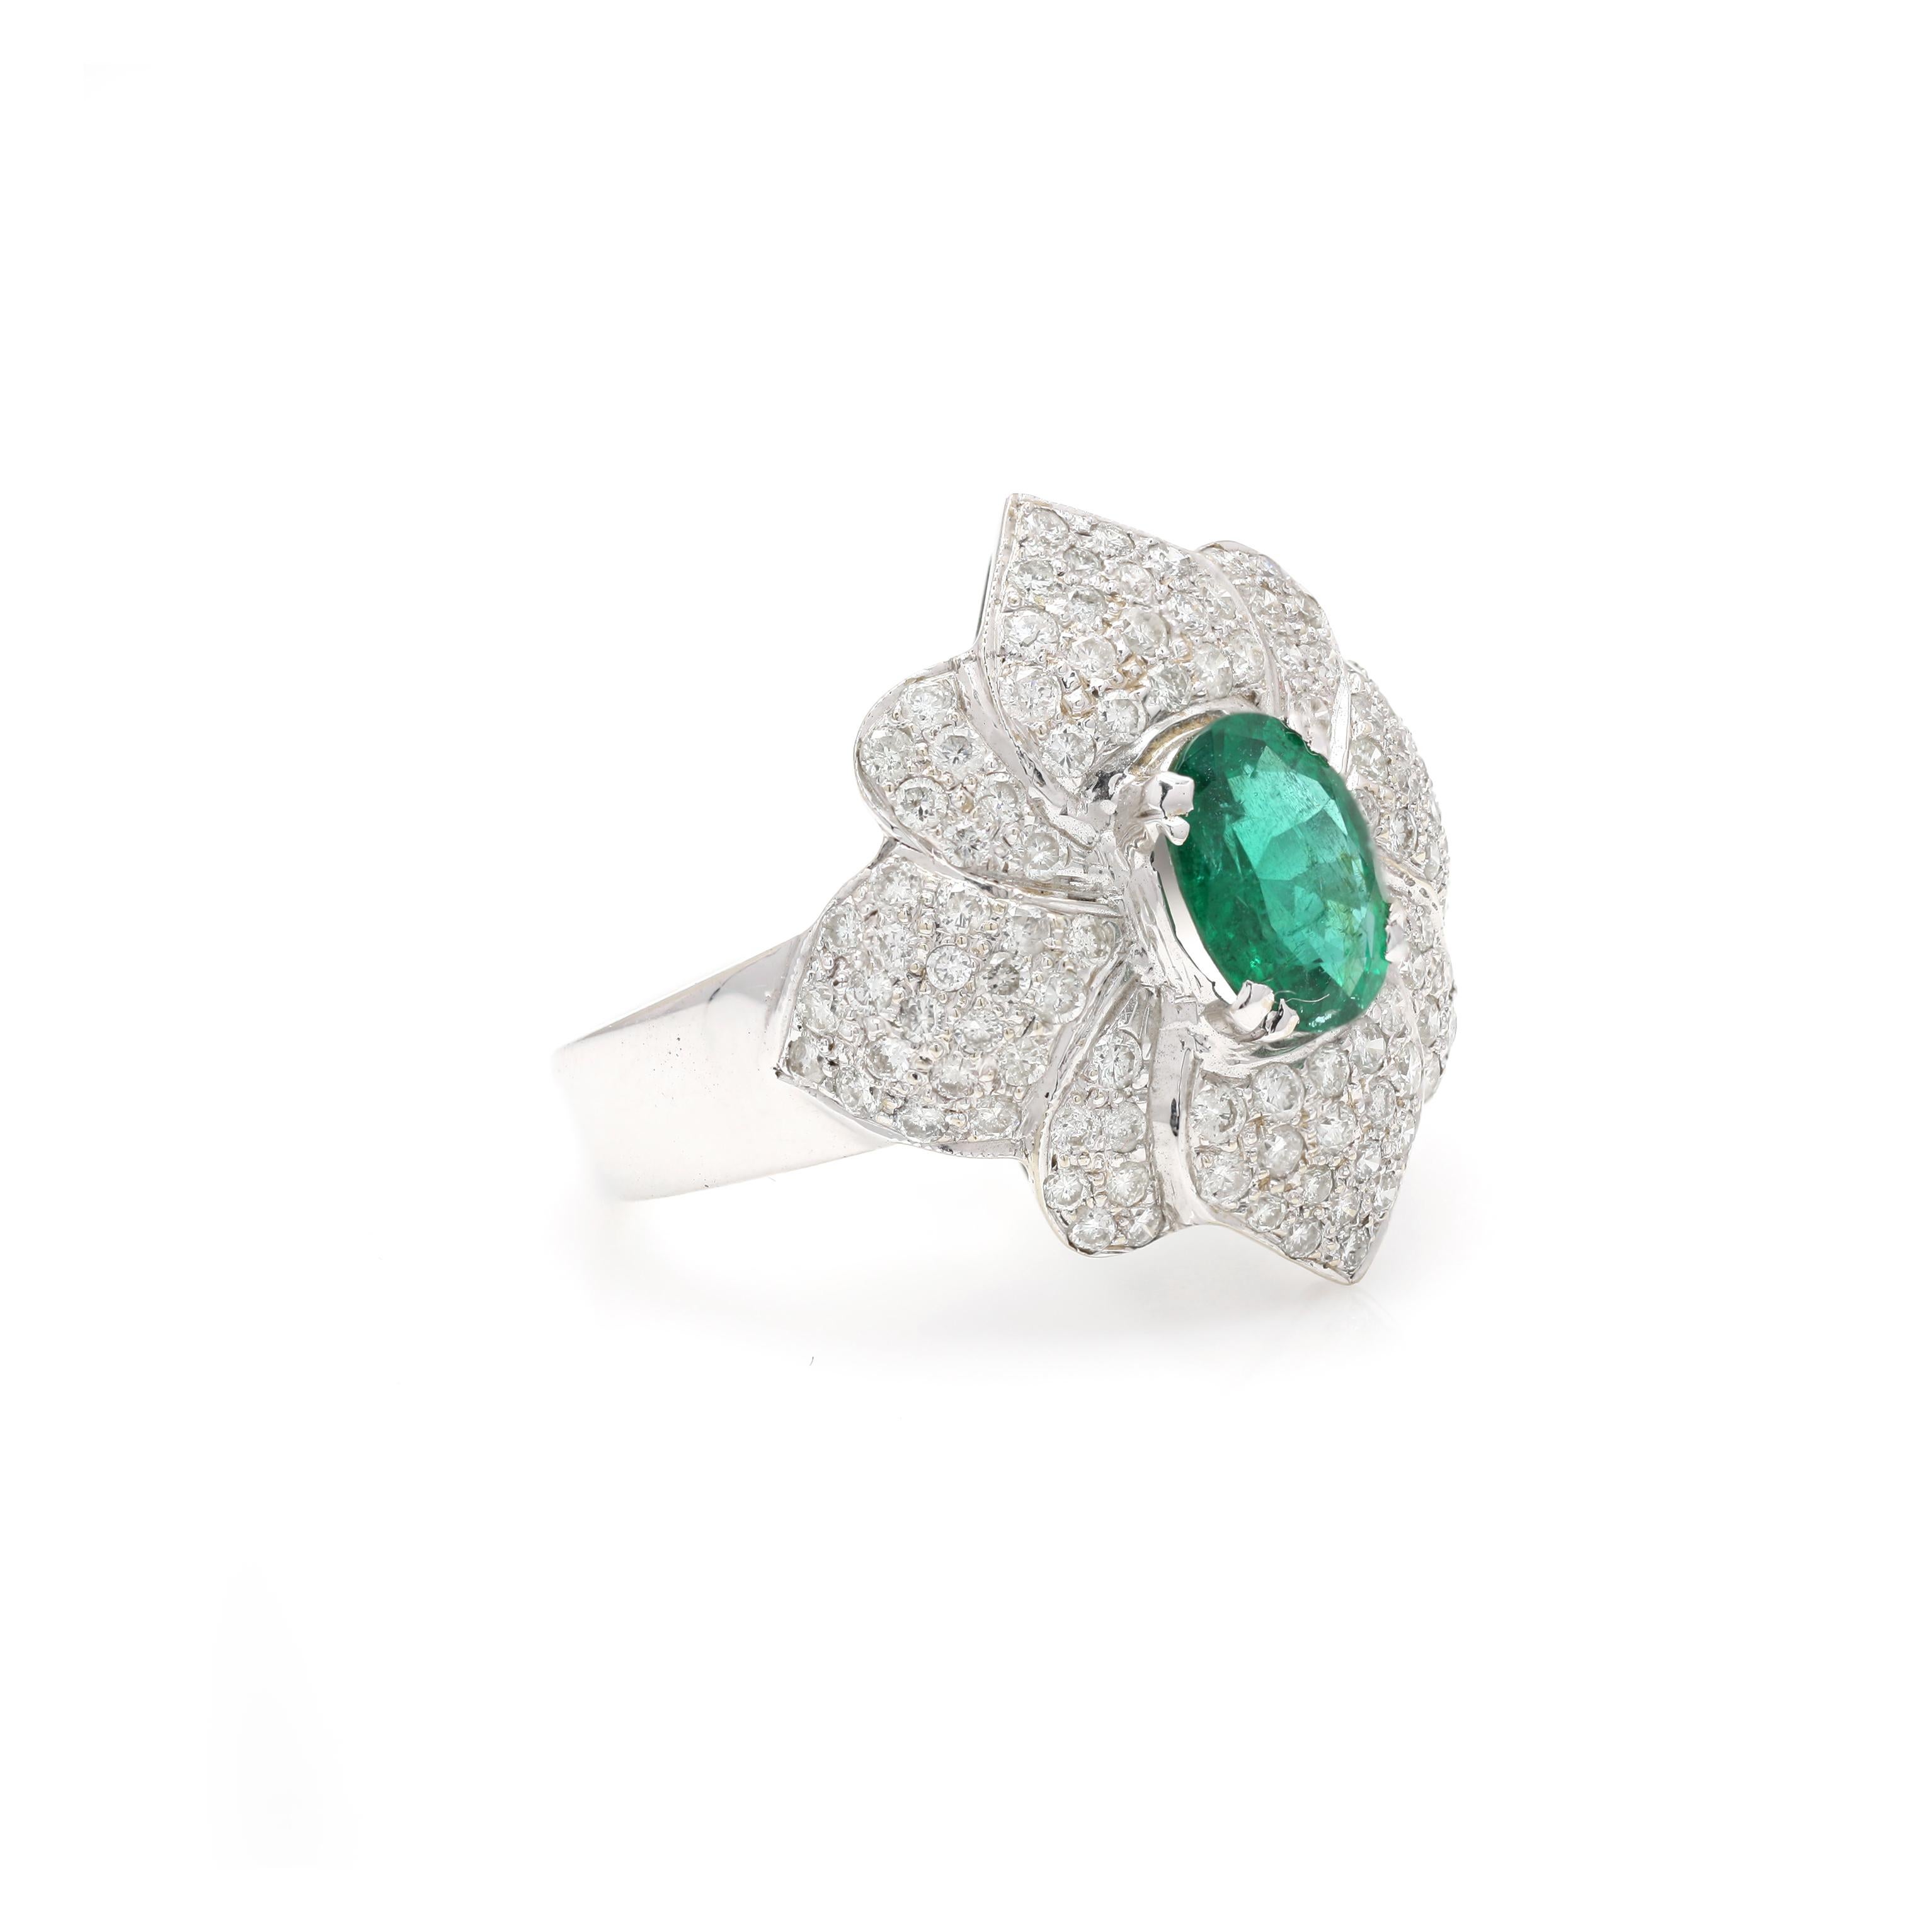 For Sale:  Designer Diamond and Emerald Floral Statement Ring in Solid 18k White Gold 2